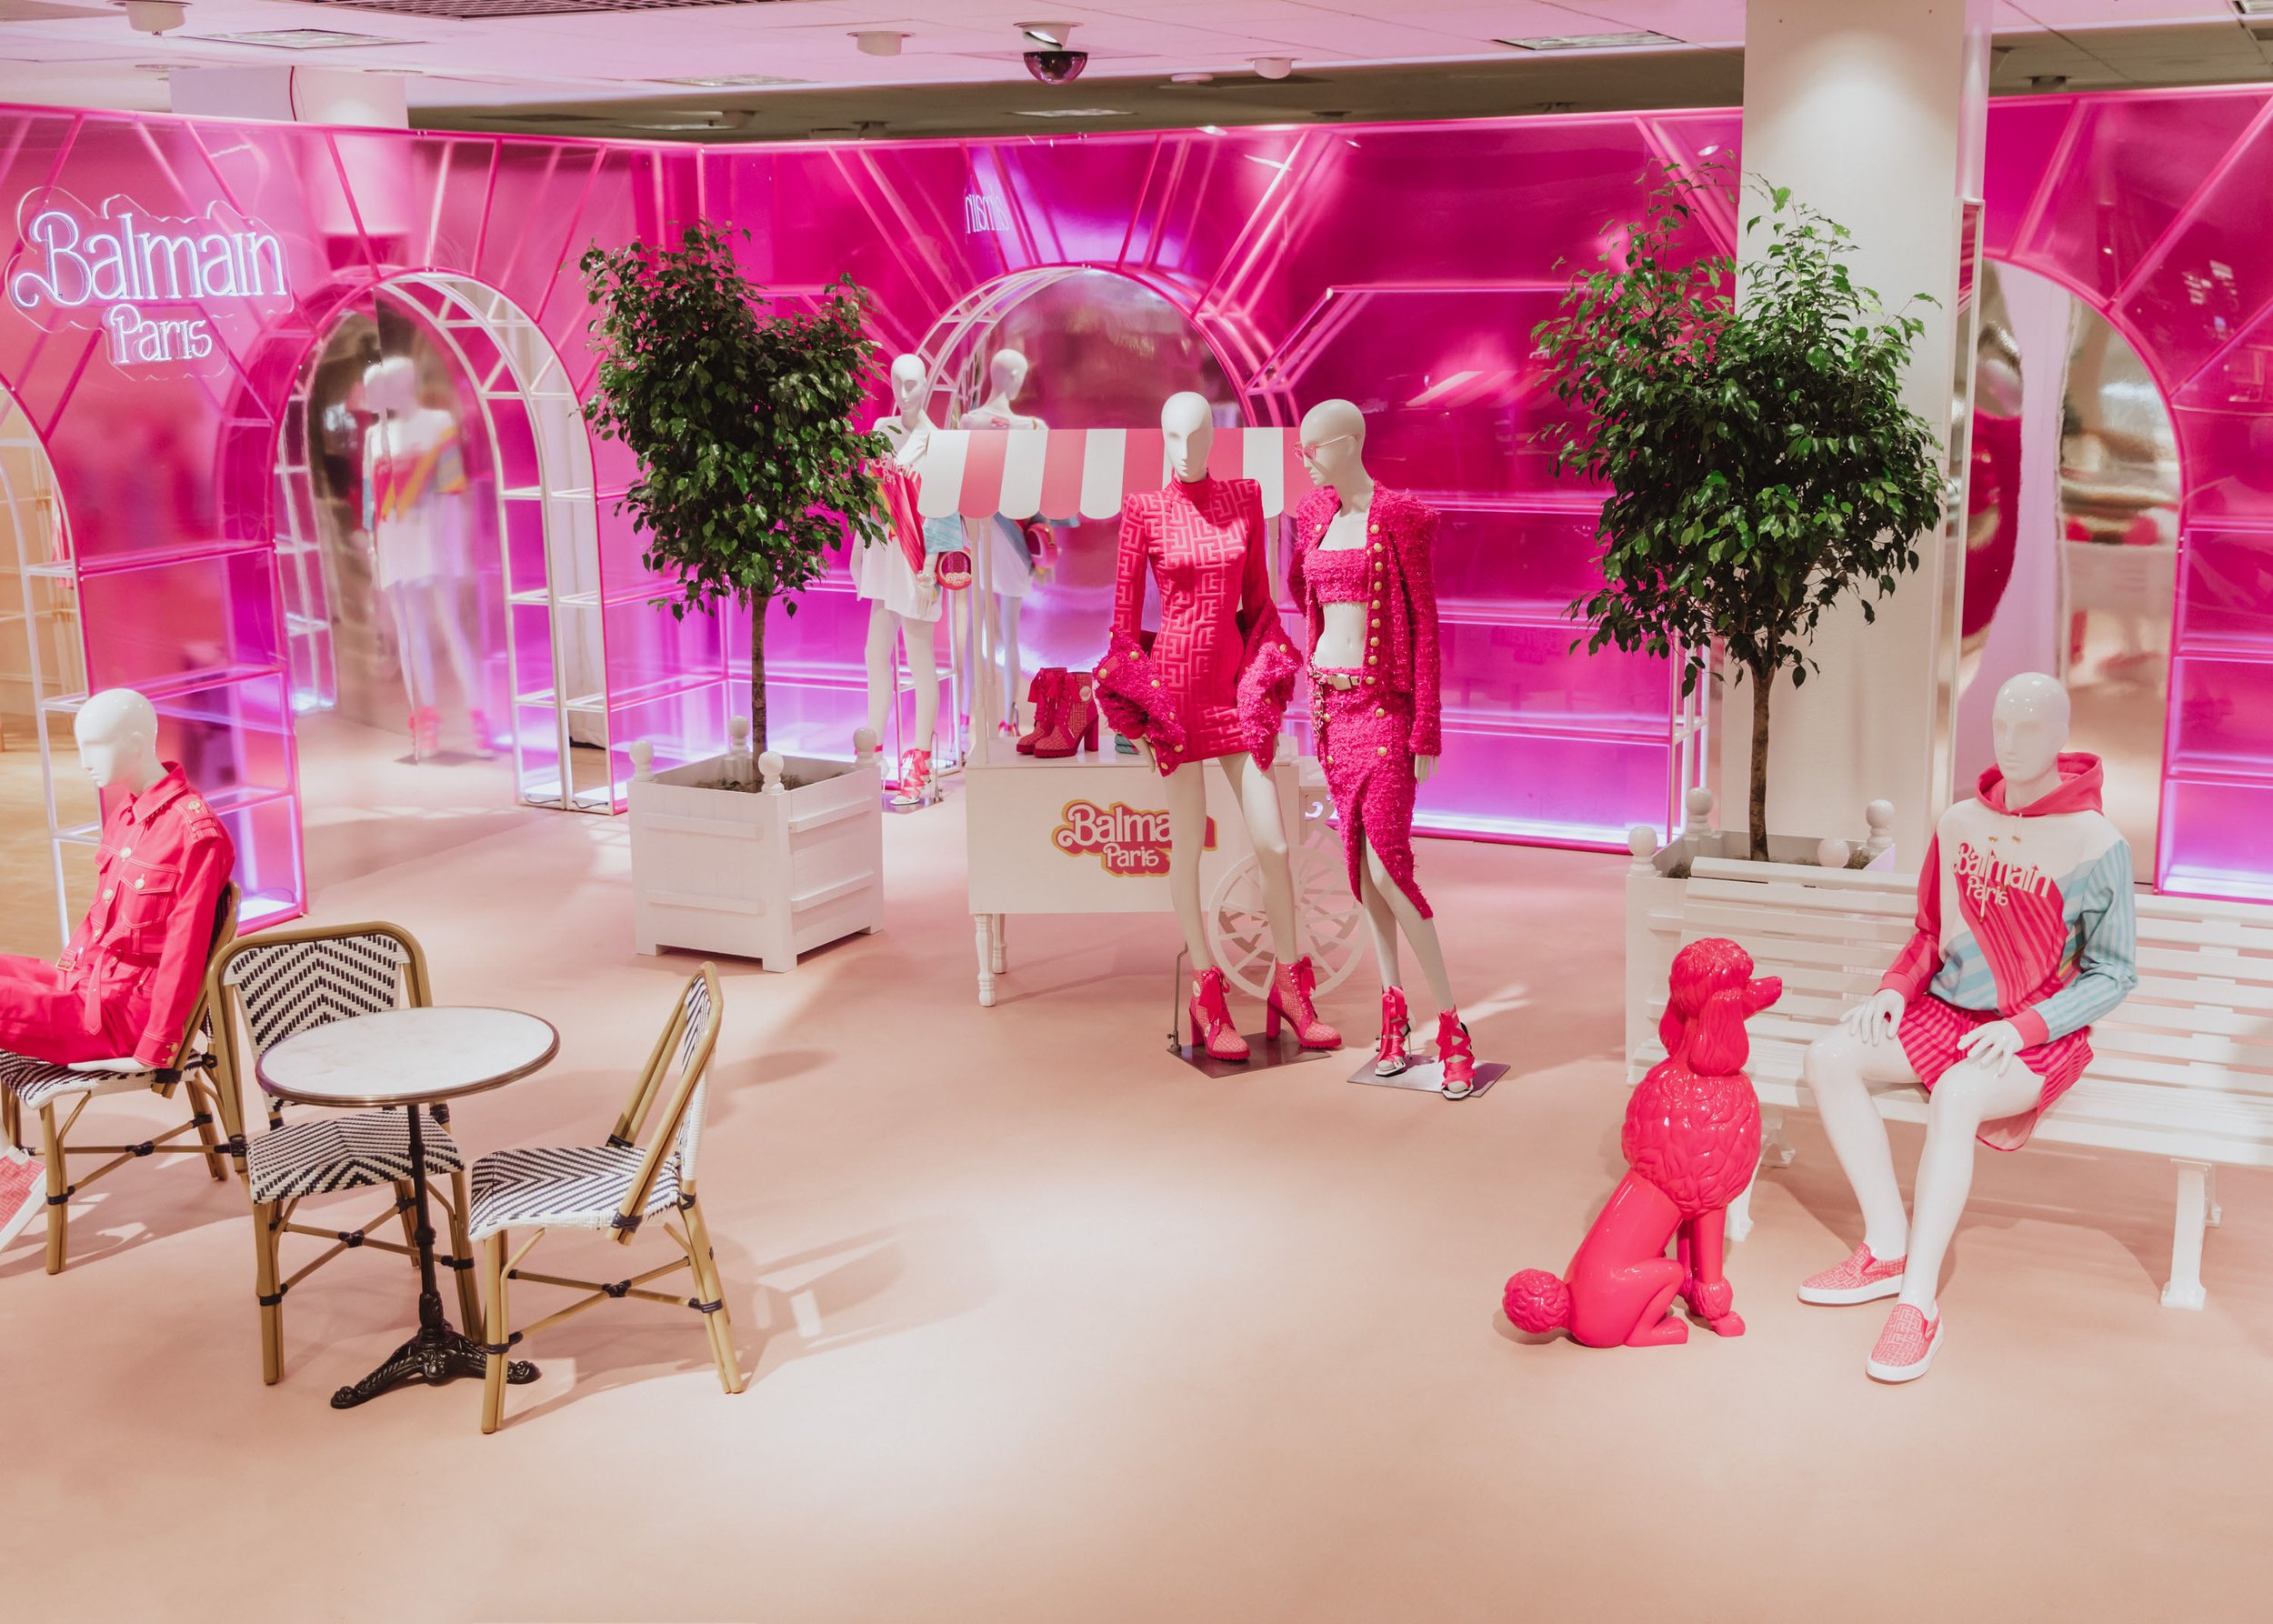 Creating a Neiman Marcus experience